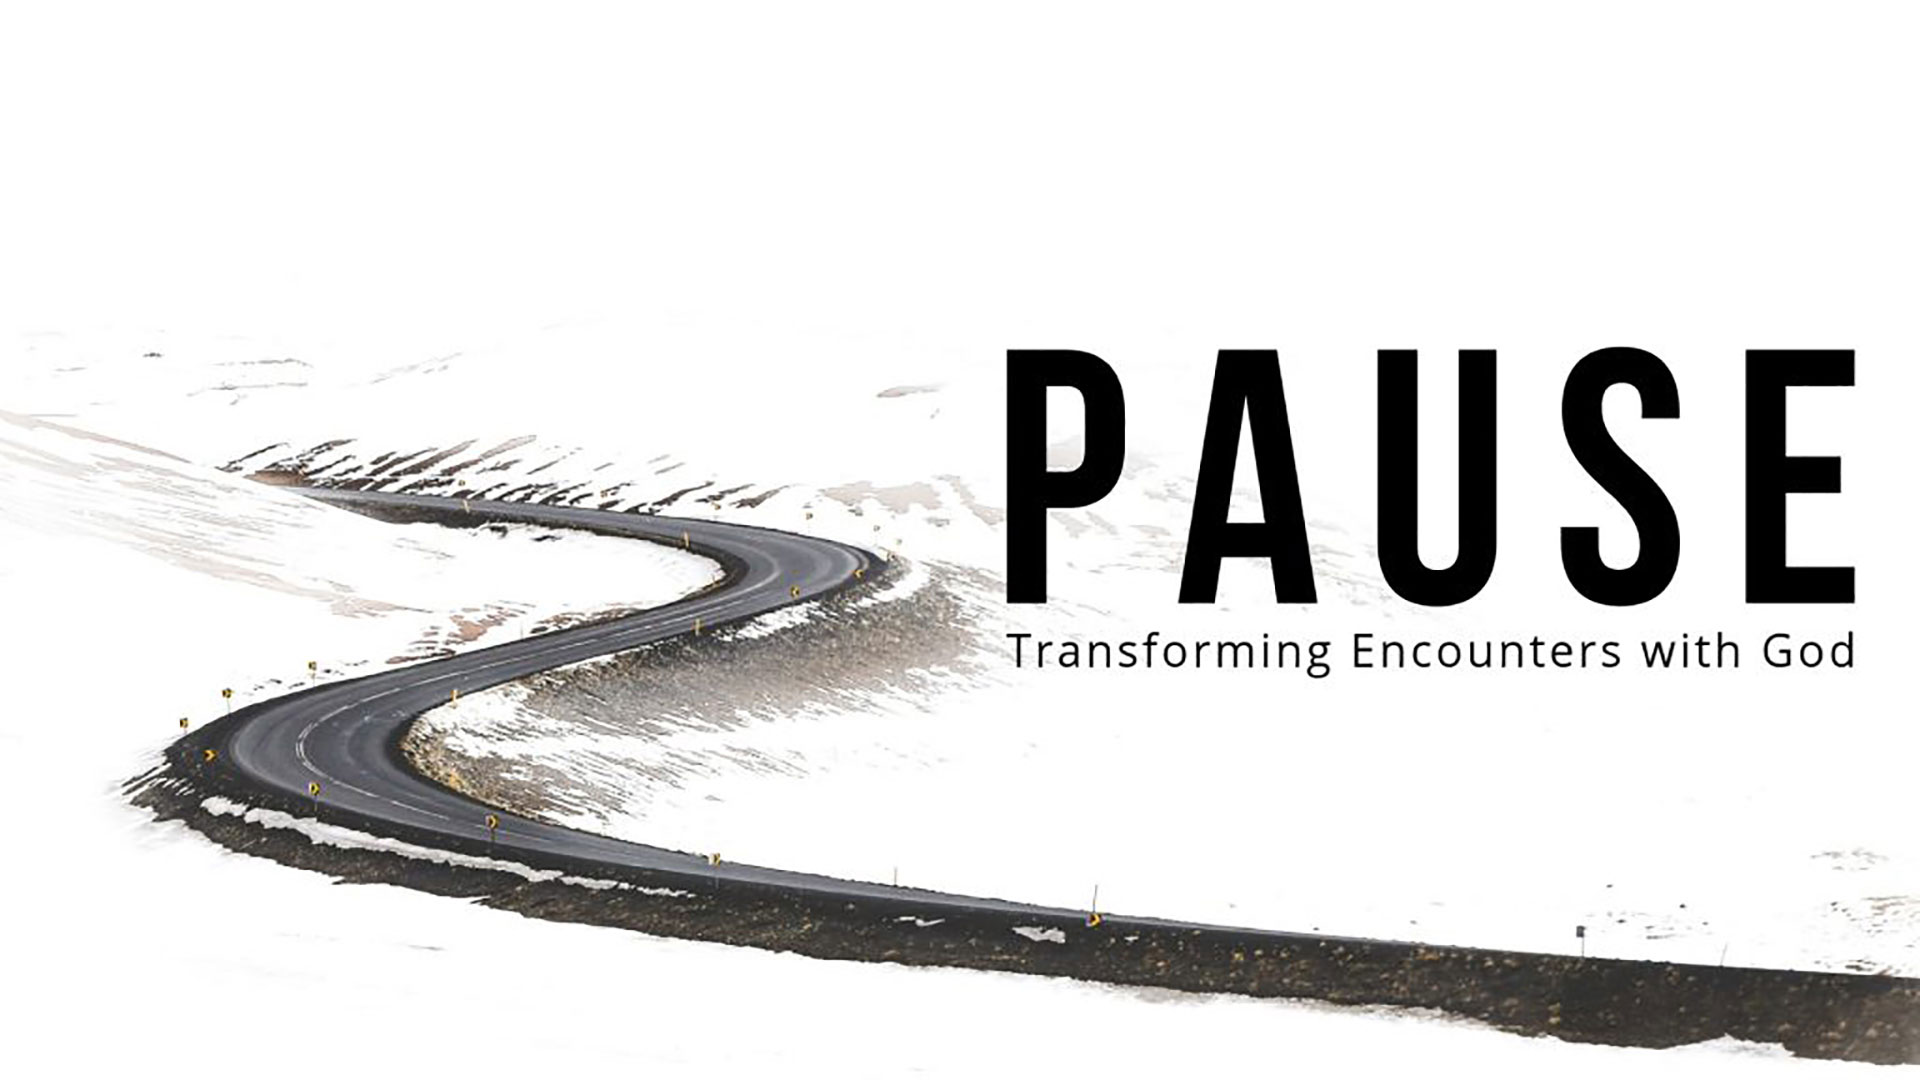 Series: Pause: Transforming Encounters With God